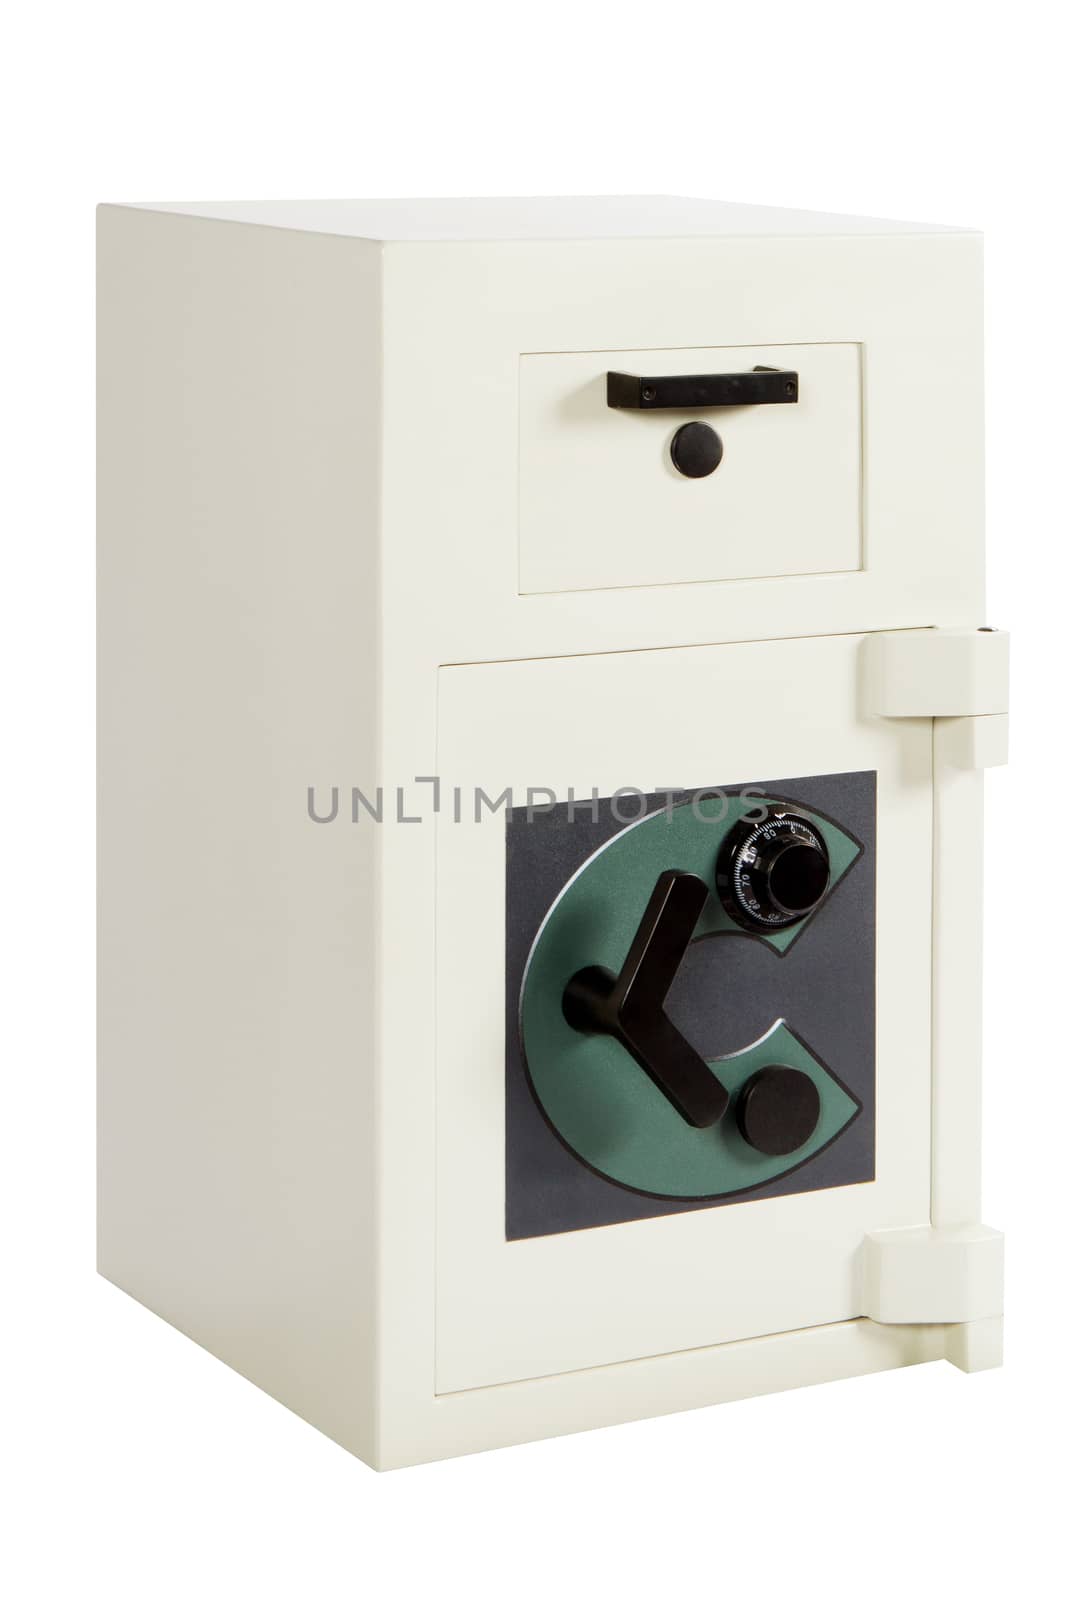 Locked closed grey safe on white,Used to store valuables